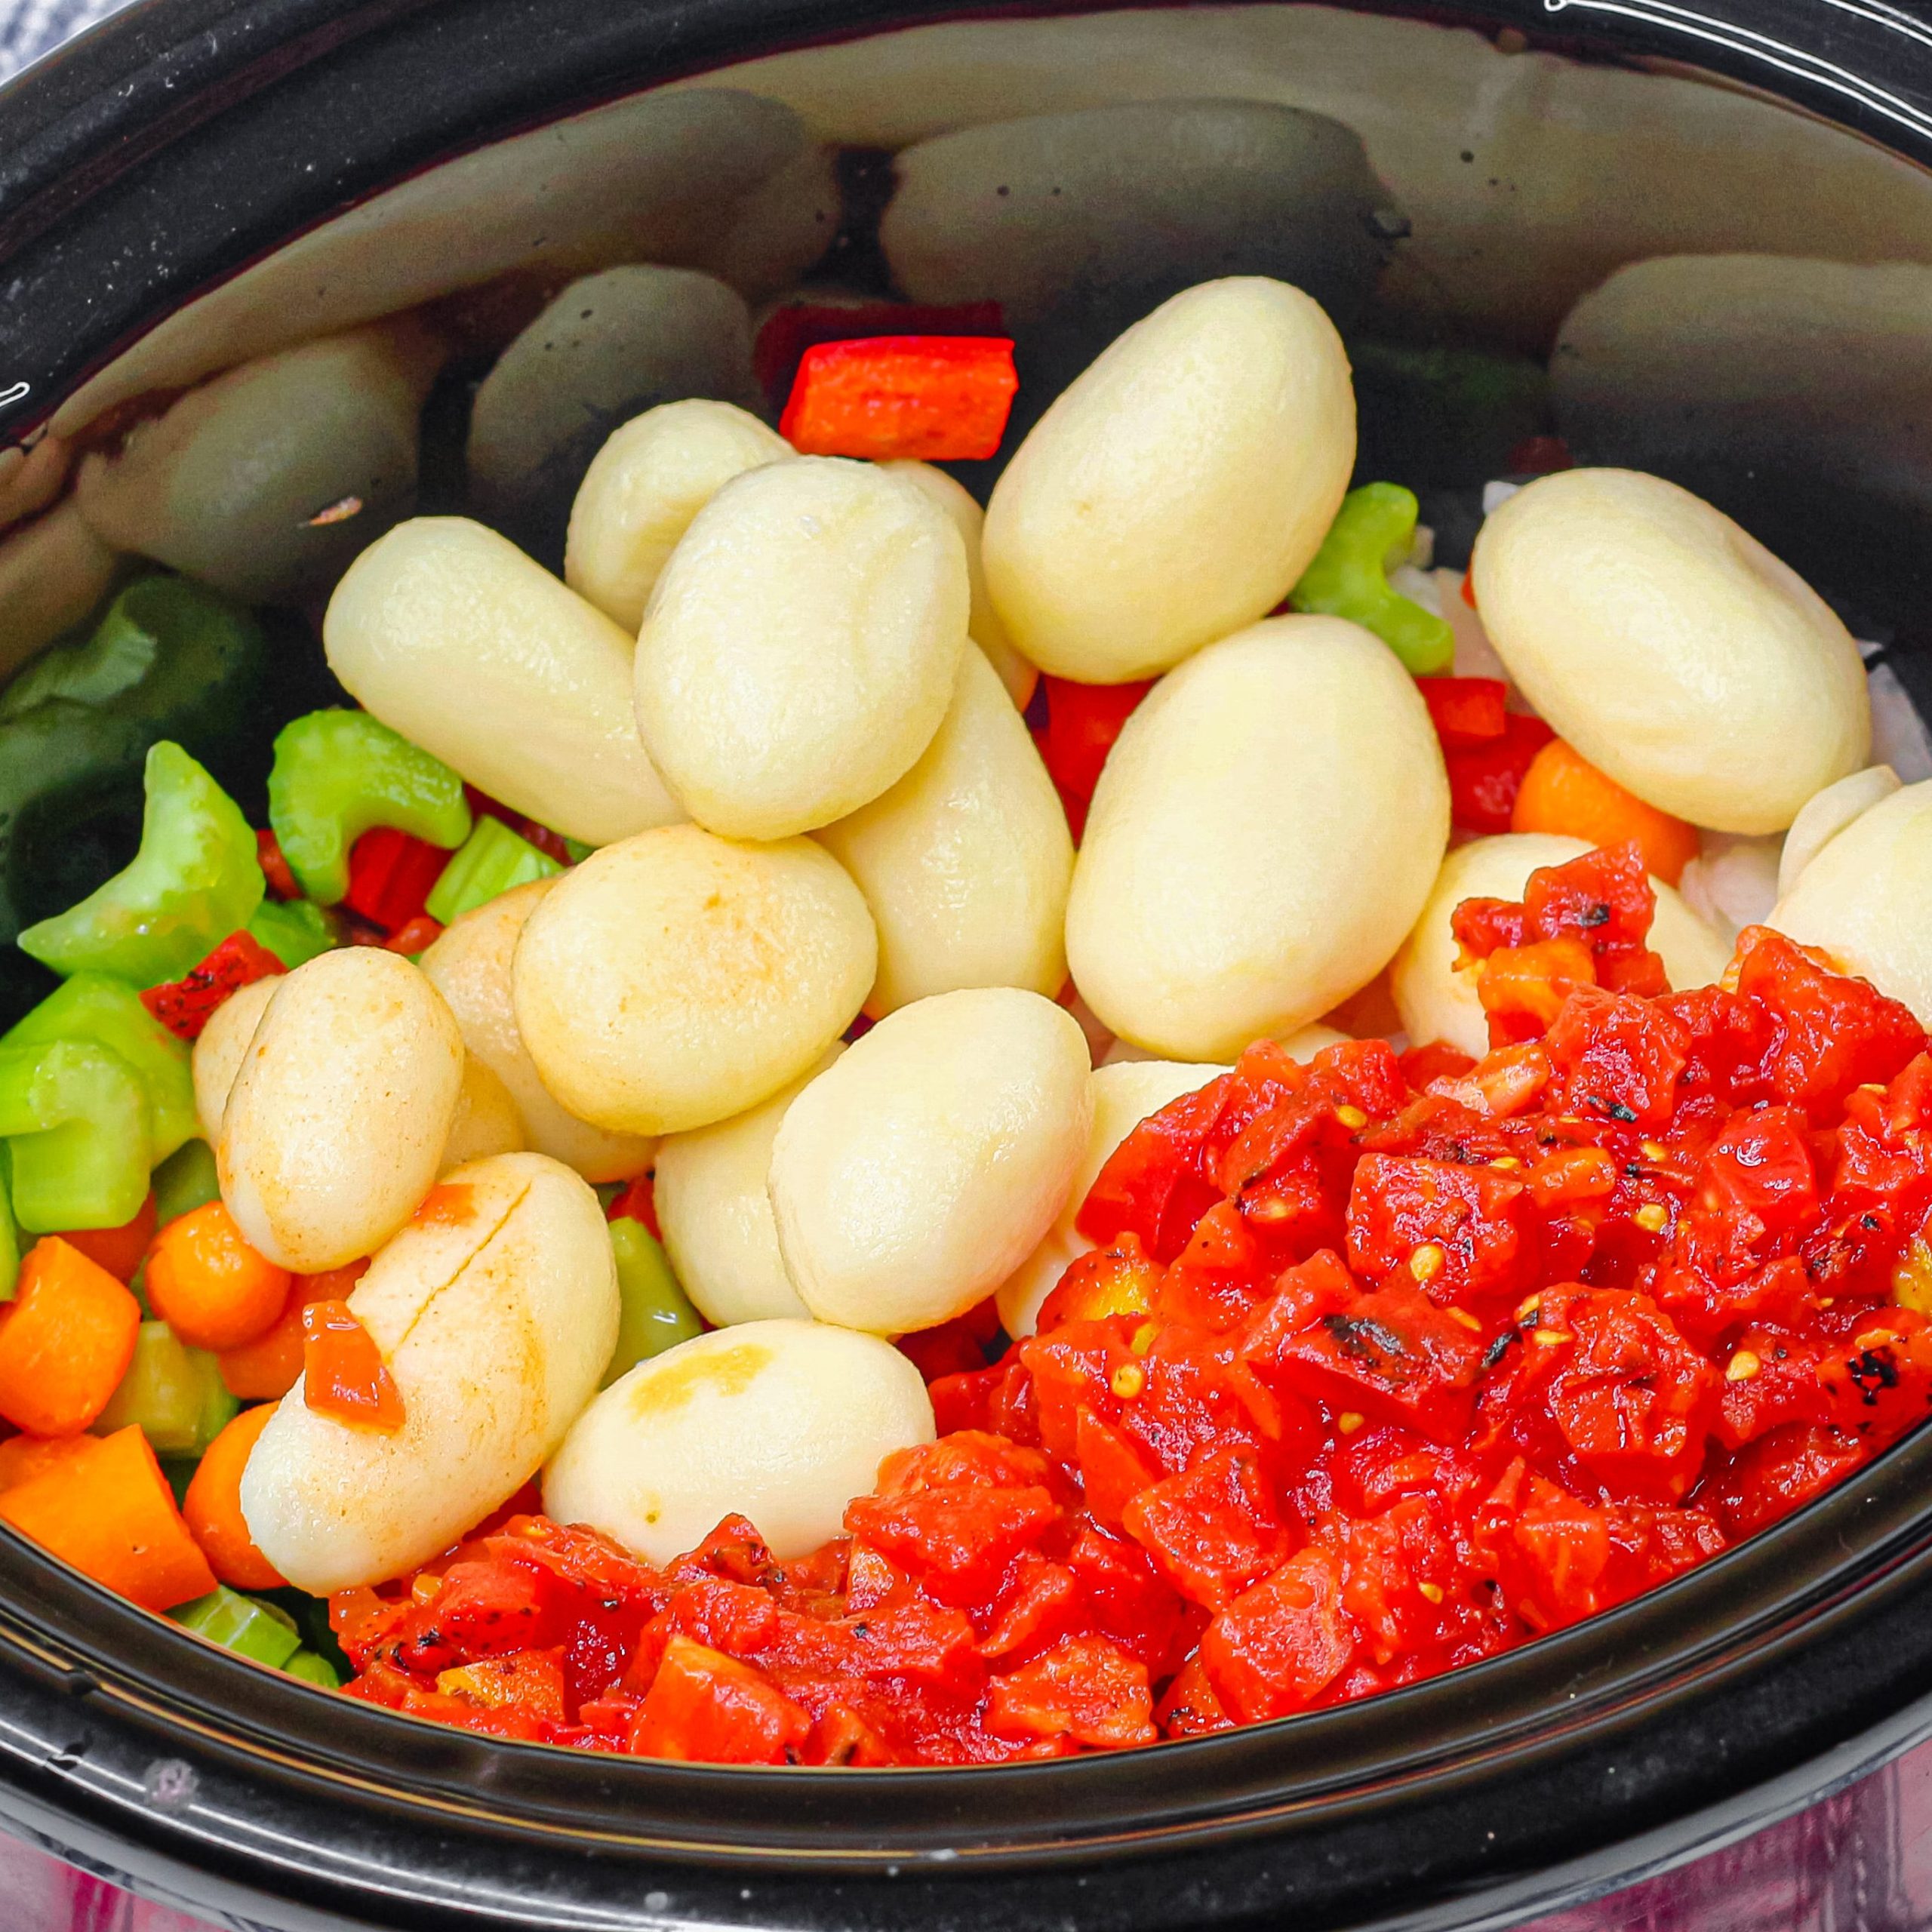 Add the chicken, vegetables, tomatoes, about 8 cups of water, parsley, minced garlic, salt, and pepper in a crockpot.